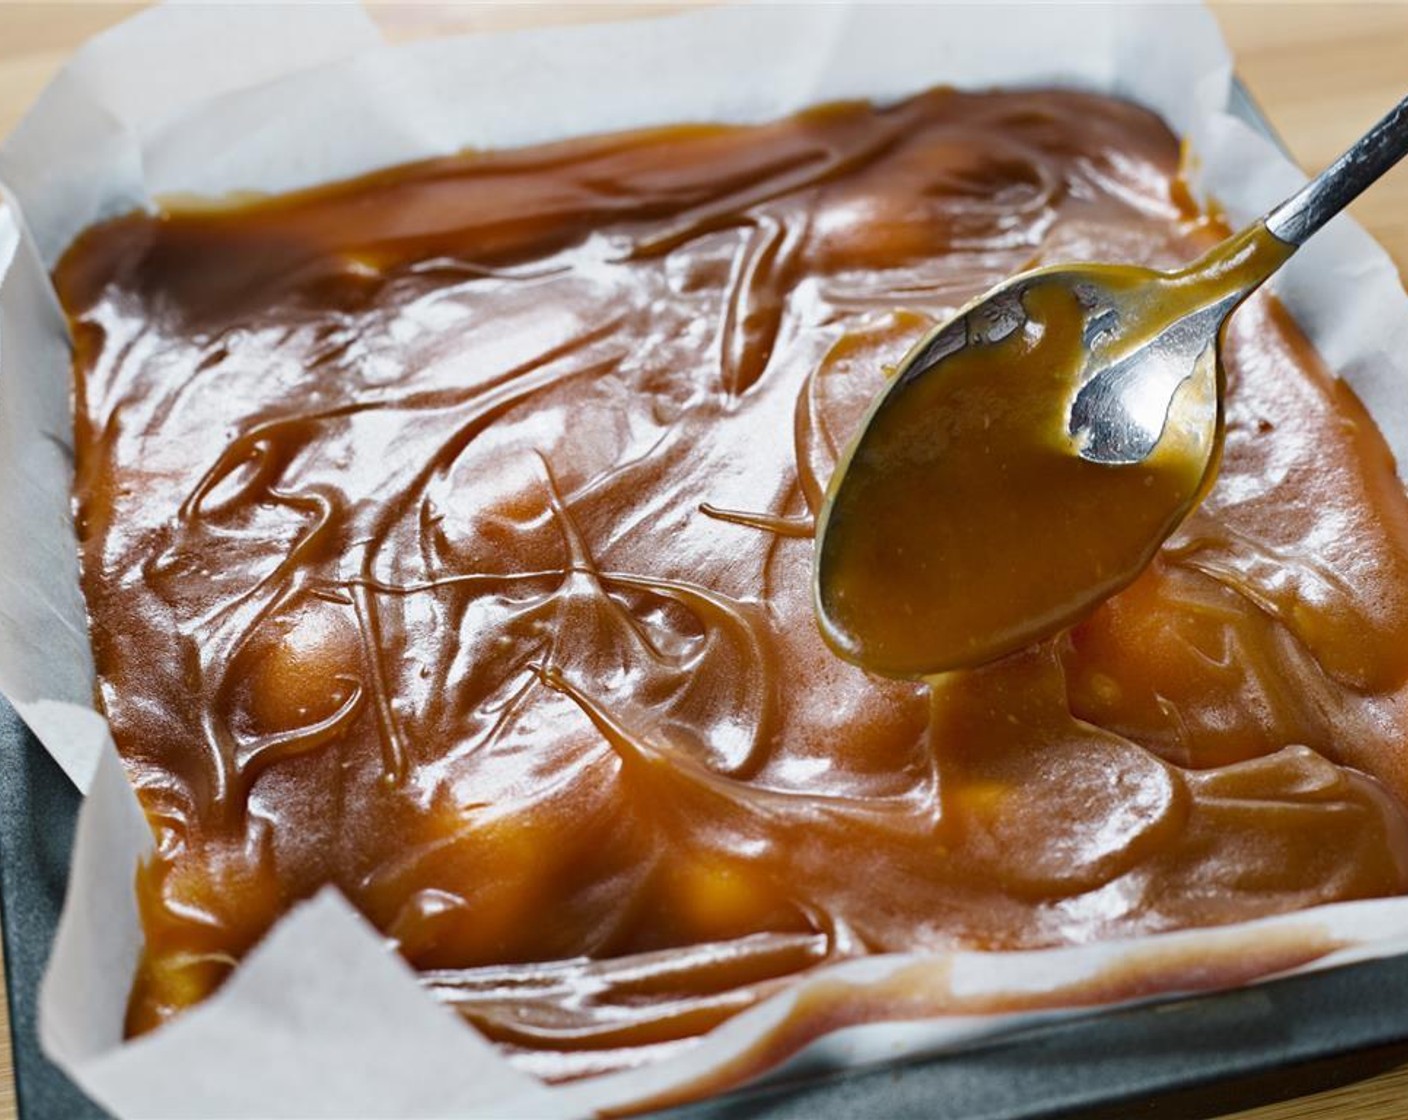 step 14 Add Caramel Sauce (1 jar) and gently smooth using a spoon.